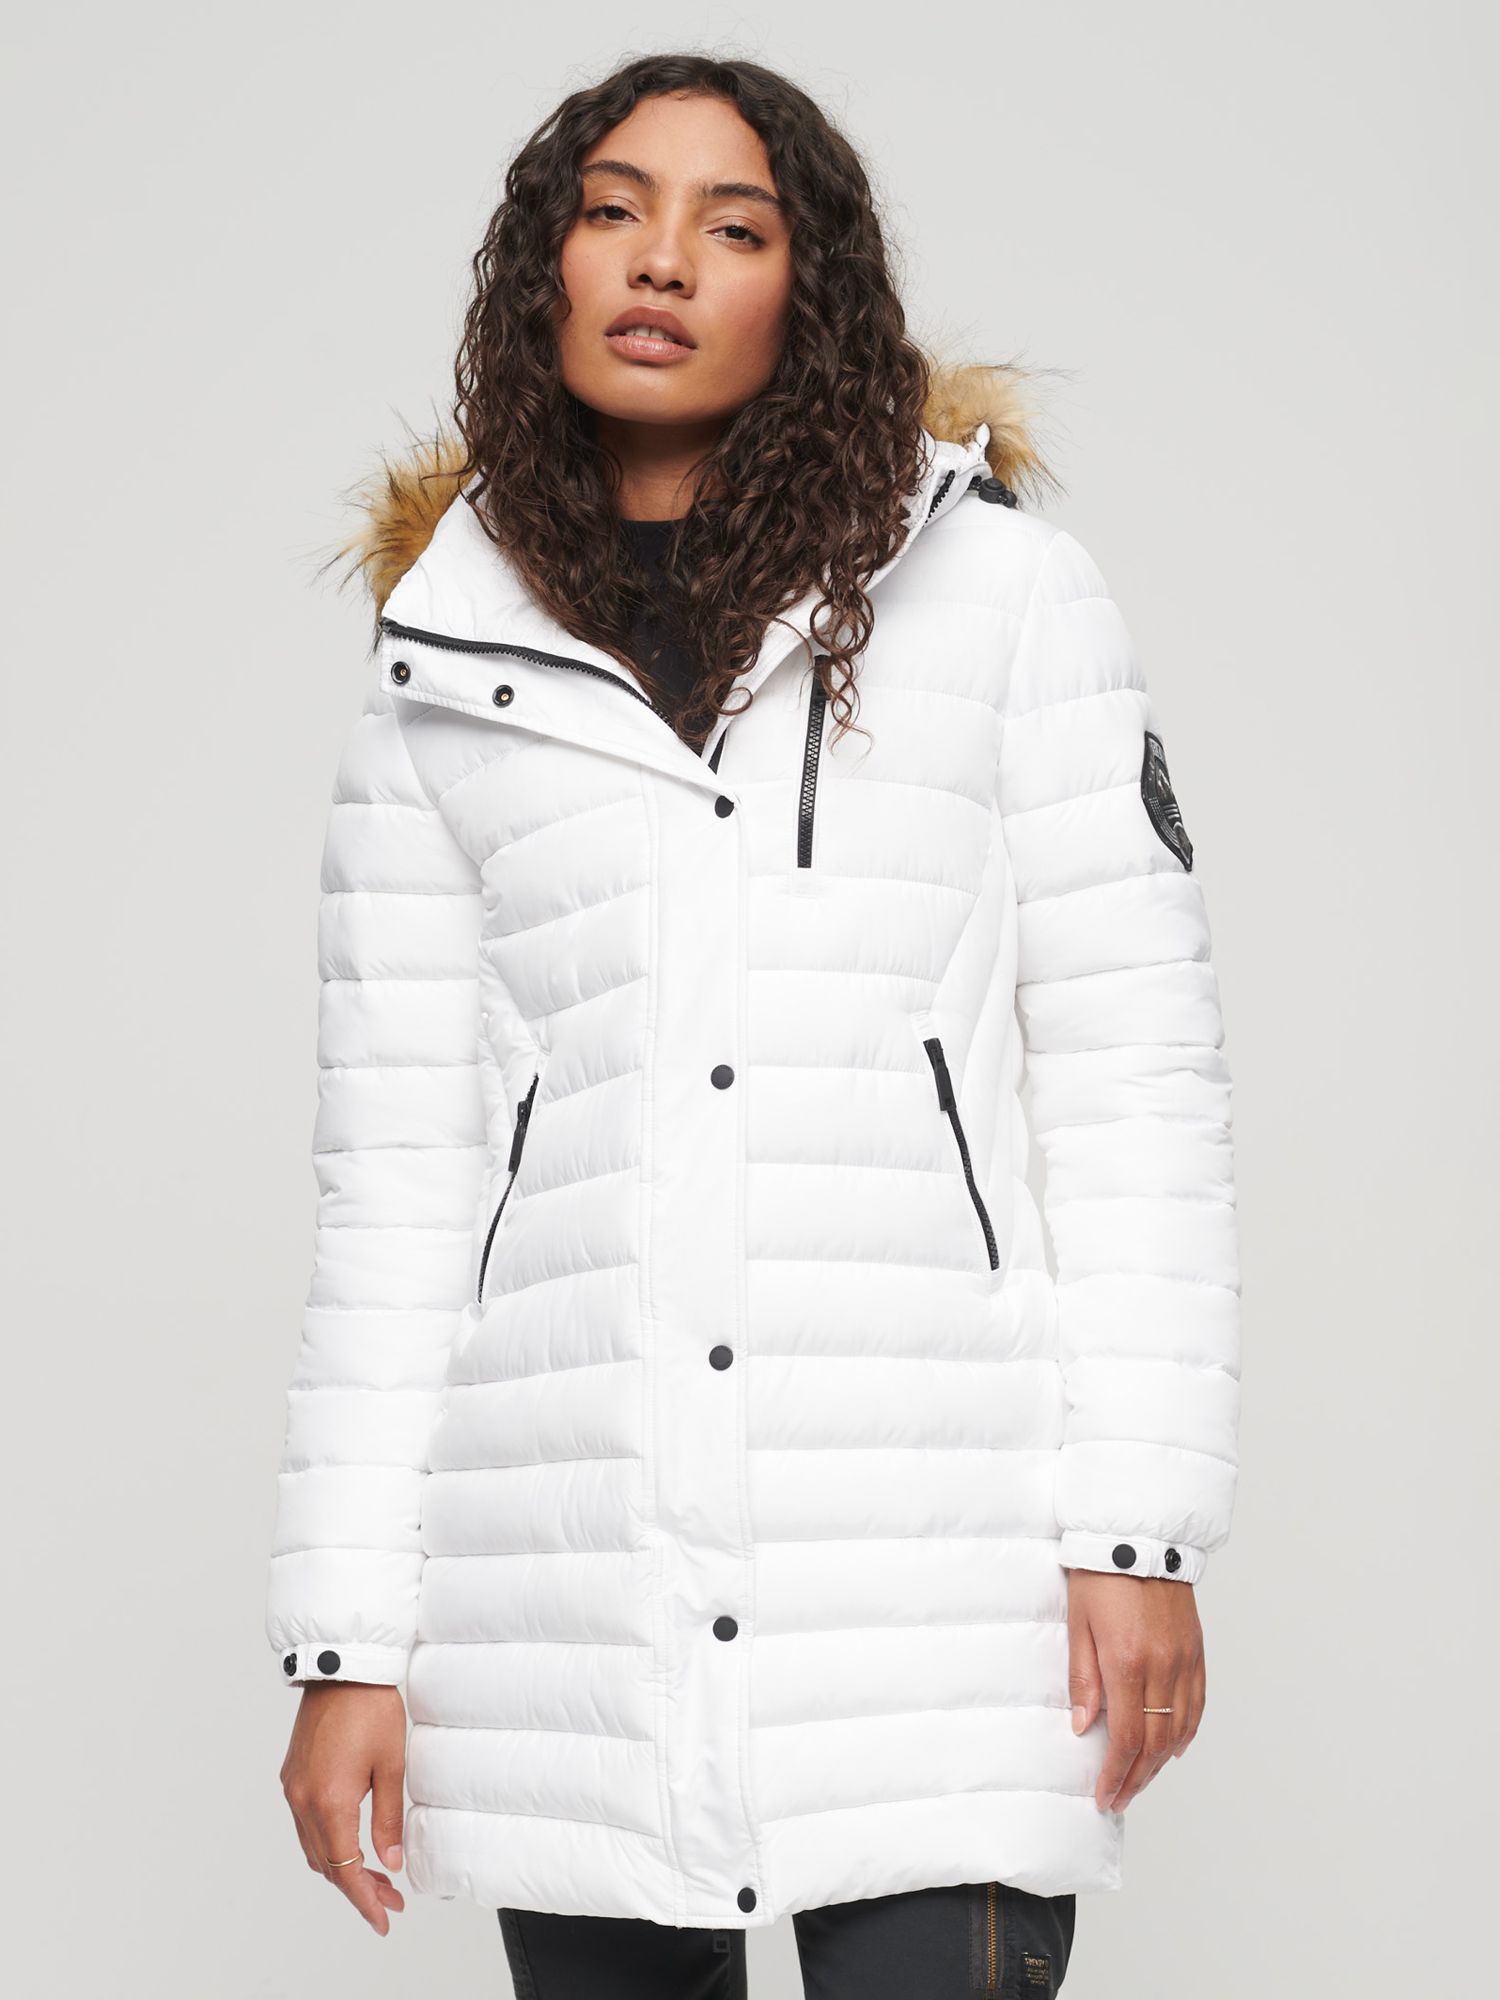 Quilted Puffer Jacket Coat - Kimono Wrap Style - Pale Beige White